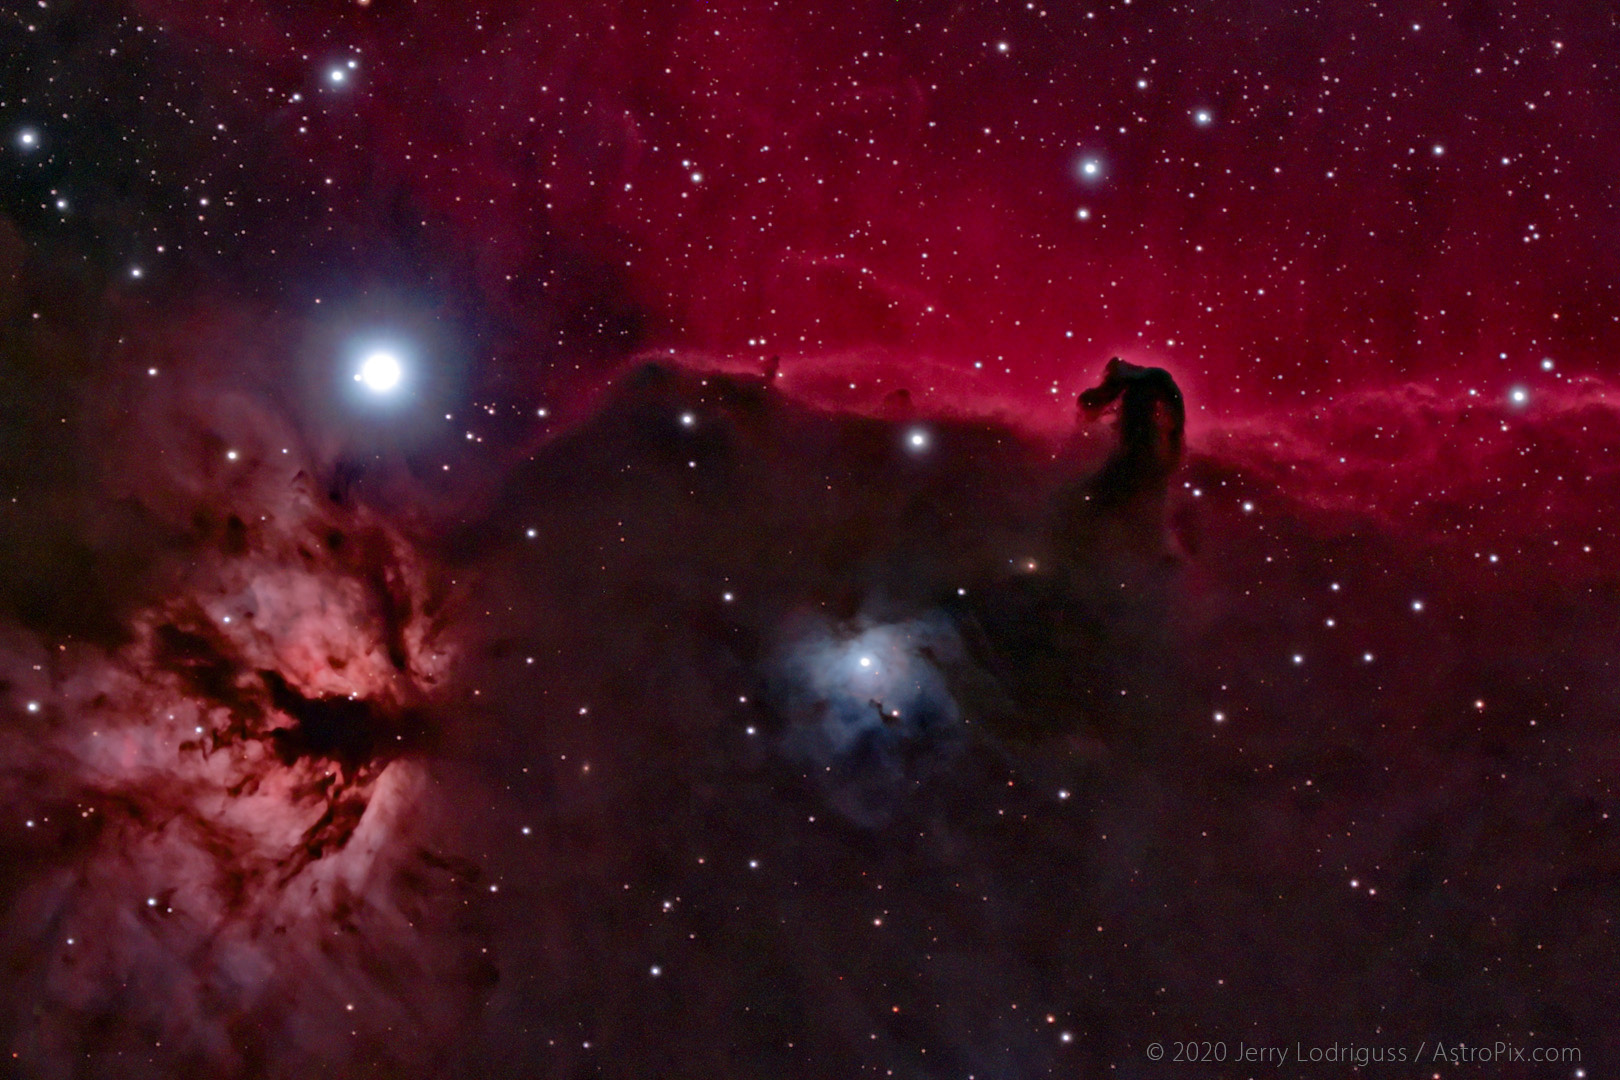 The Horsehead Nebula, B33, is the dark nebula in front of the bright red emission nebula IC 434. Along with the Orion Nebula, these nebulae near the Horsehead are part of a very large complex that is a stellar nursery where stars are forming out of the dust and gas. Located about 1,500 light years away, this complex is the closest star forming region to our own solar system. The Flame Nebula, NGC 2024, is to the lower left of Alnitak, Zeta Orionis, the easternmost star in the three distinctive stars in the Hunter's belt of Orion, and the brightest star in this photo. To the lower left of the Horsehead is the blue reflection nebula NGC 2023. Dark Nebulae are clouds of dust in space that obscure the stars behind them. Emission nebulae are clouds of glowing ionized gas. Reflection nebulae do not shine by their own light, but are visible because they reflect the light of nearby stars.